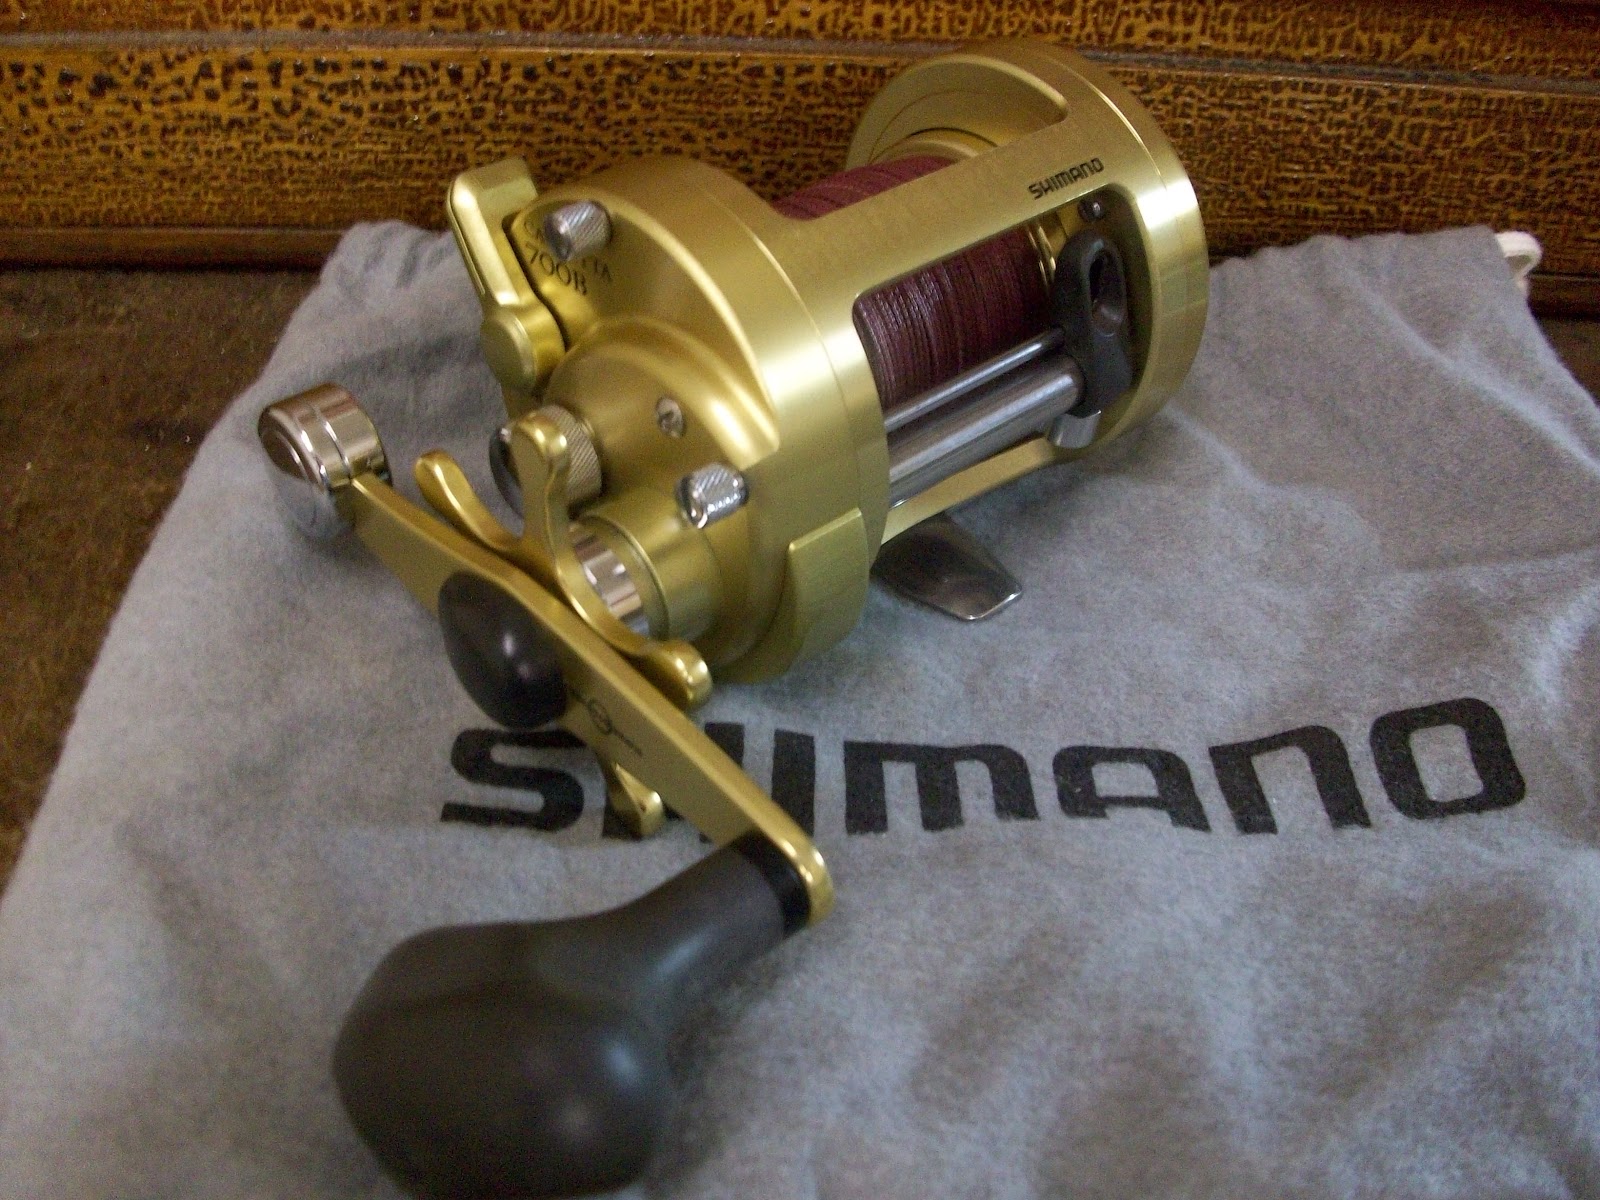 Musky reel recommendations